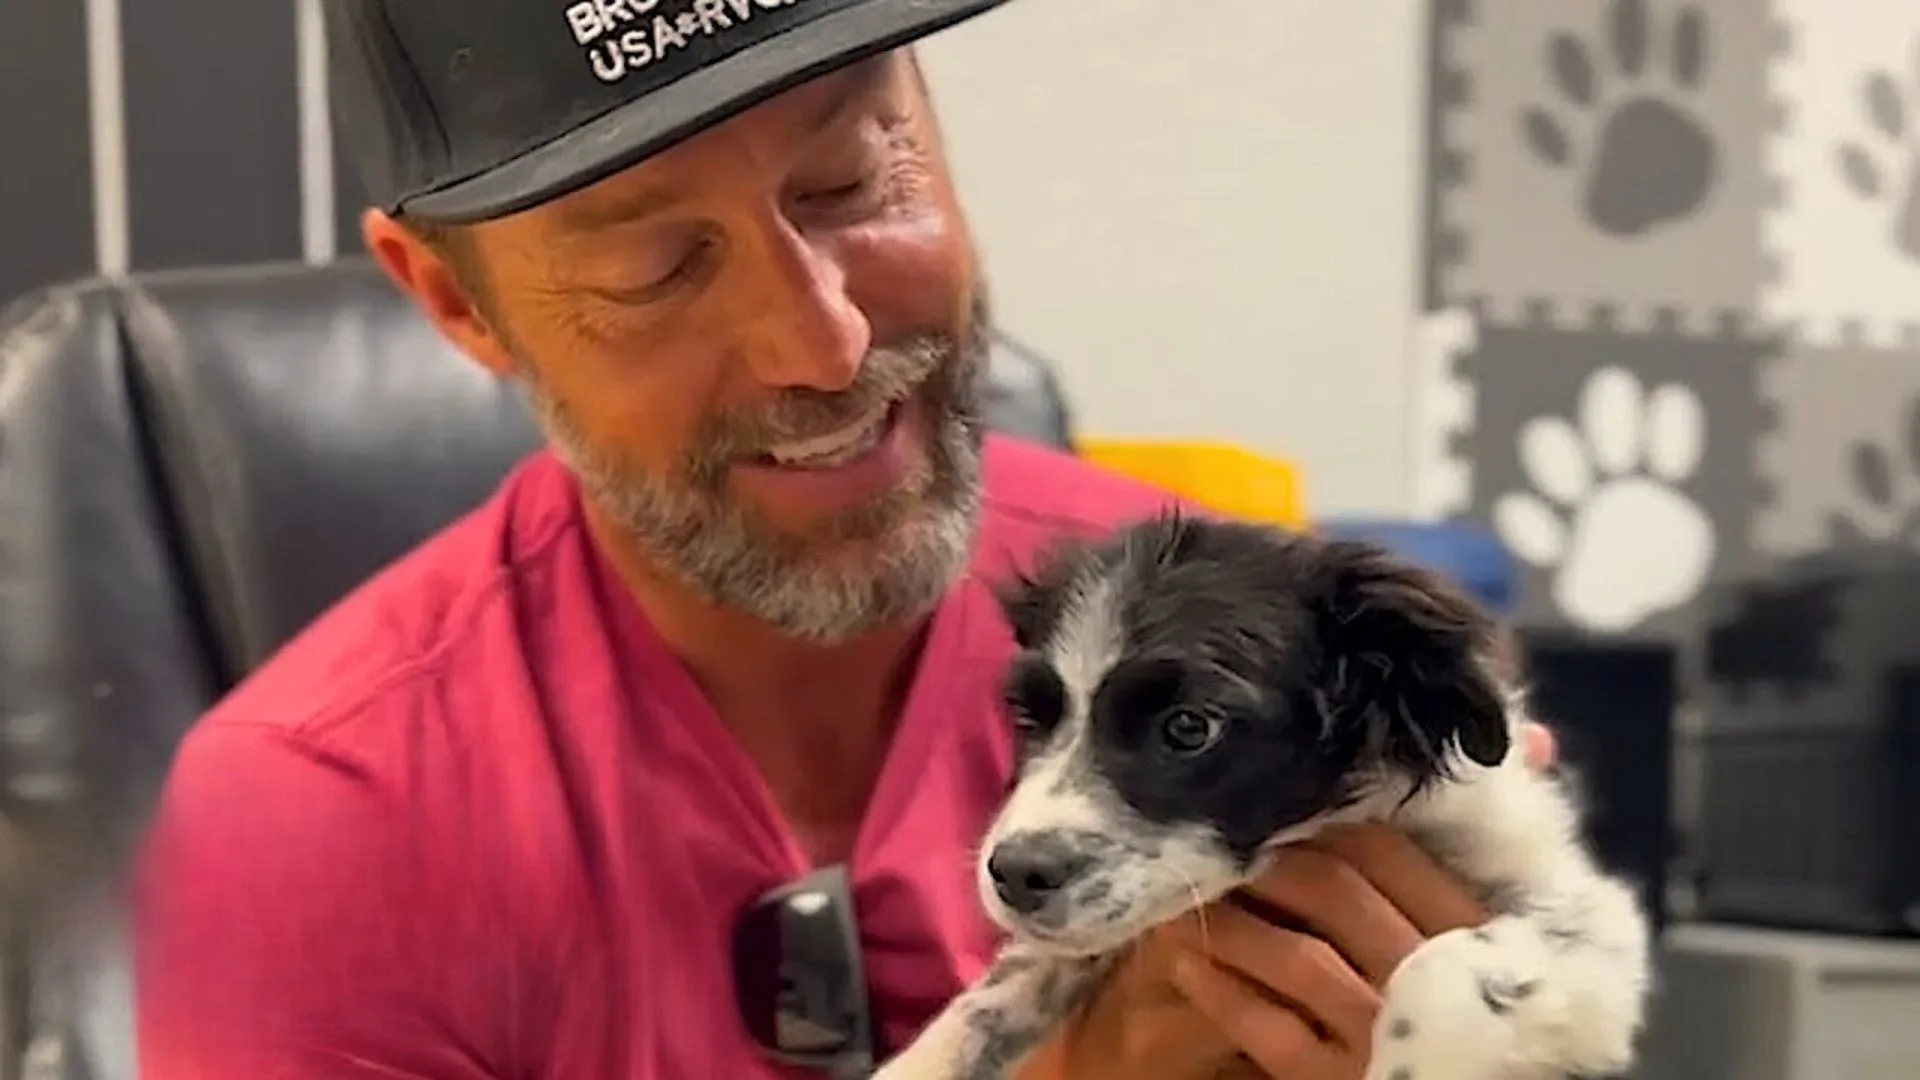 Adorable Shelter Puppy Takes This Man’s Hand And Asks Him To Take Him Home